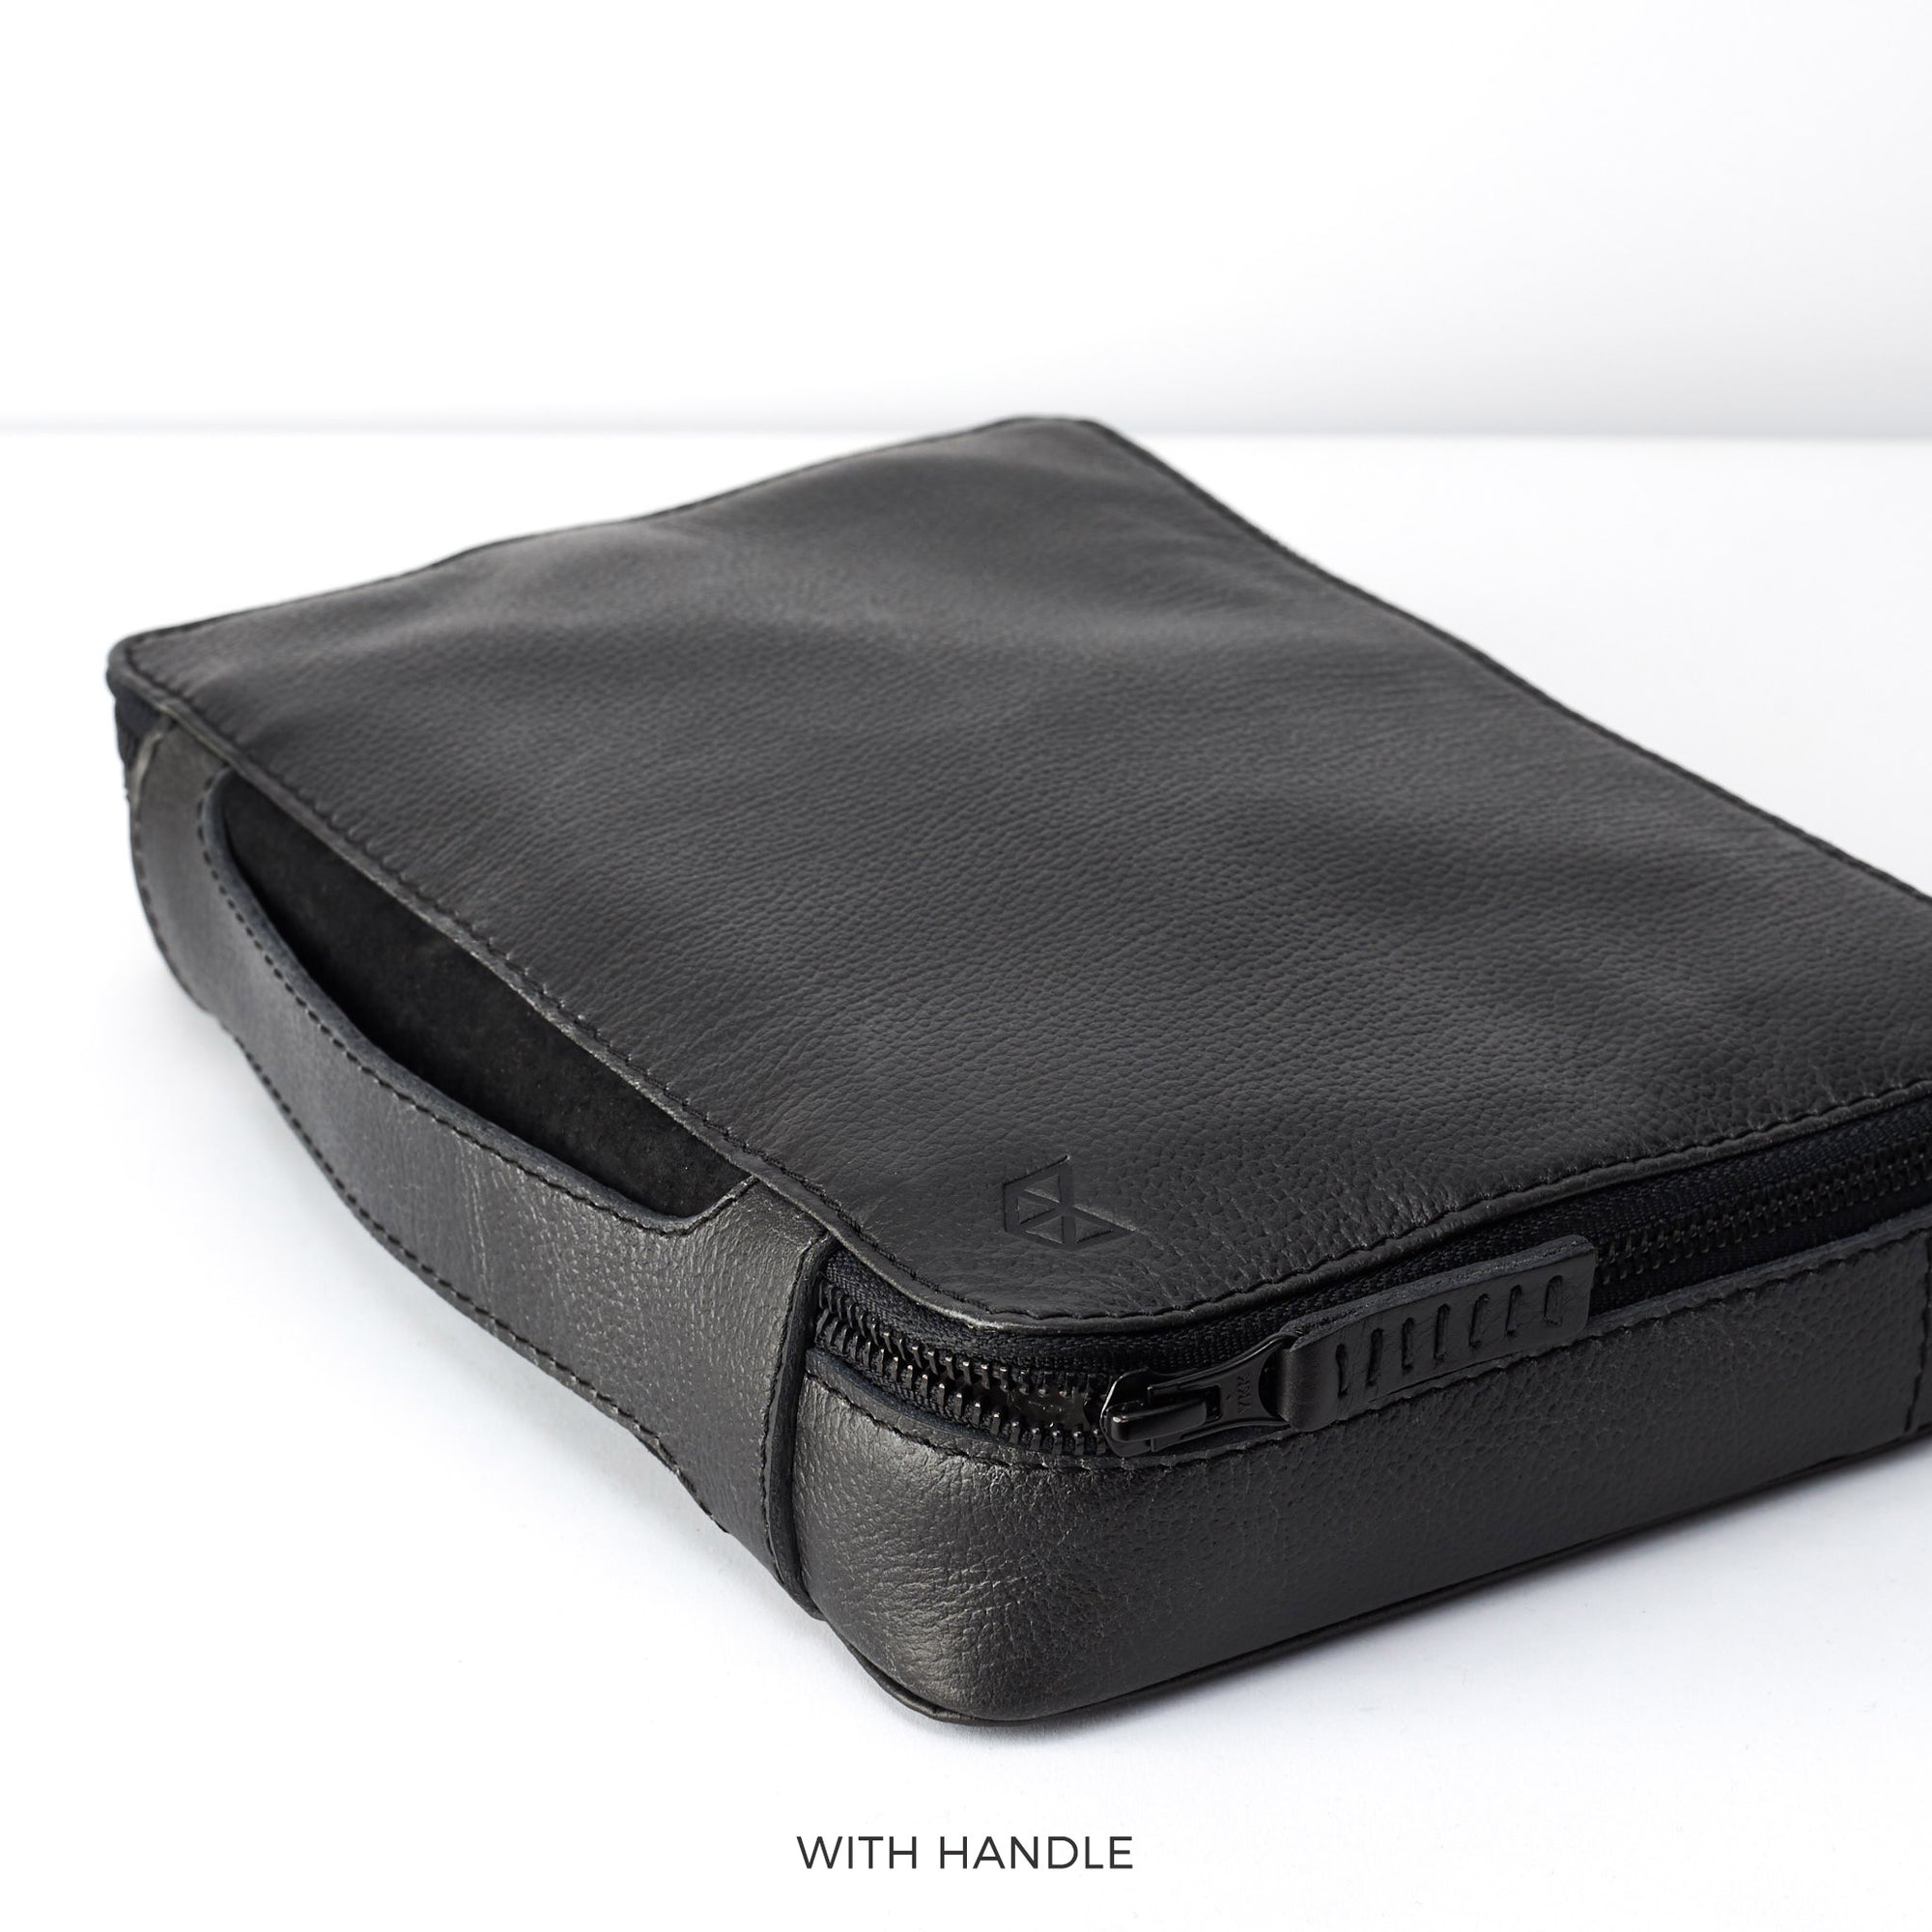 Leather handle.  Best travel tech organizer black by Capra Leather.